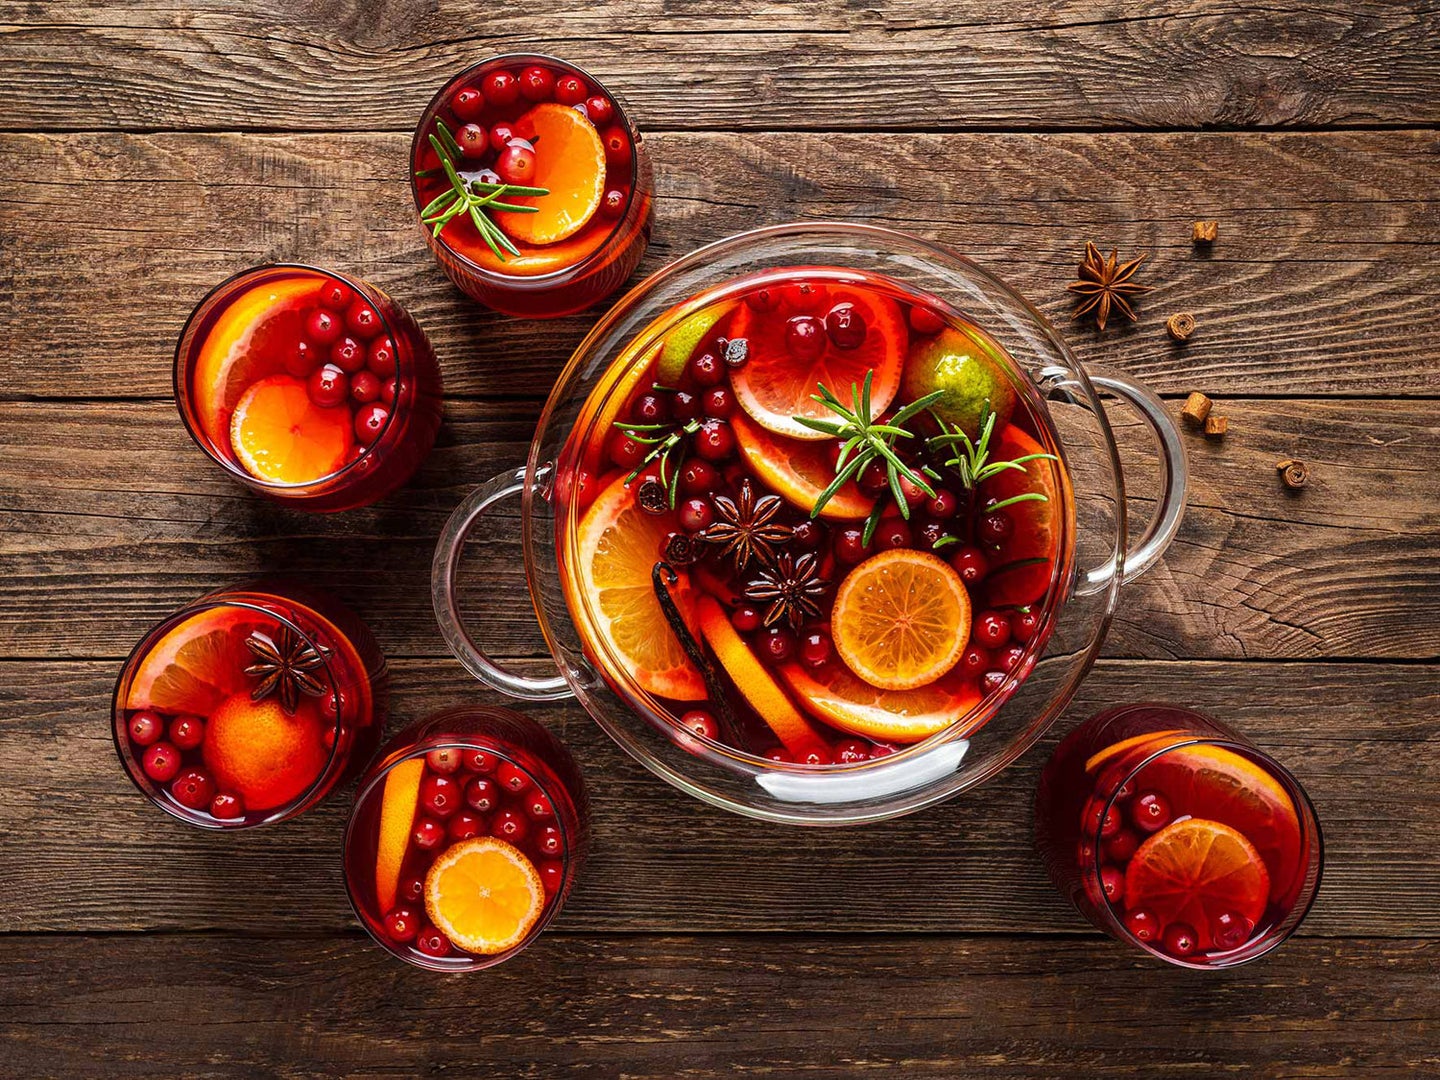 Punch bowl full of orang slices, cranberries, and punch.